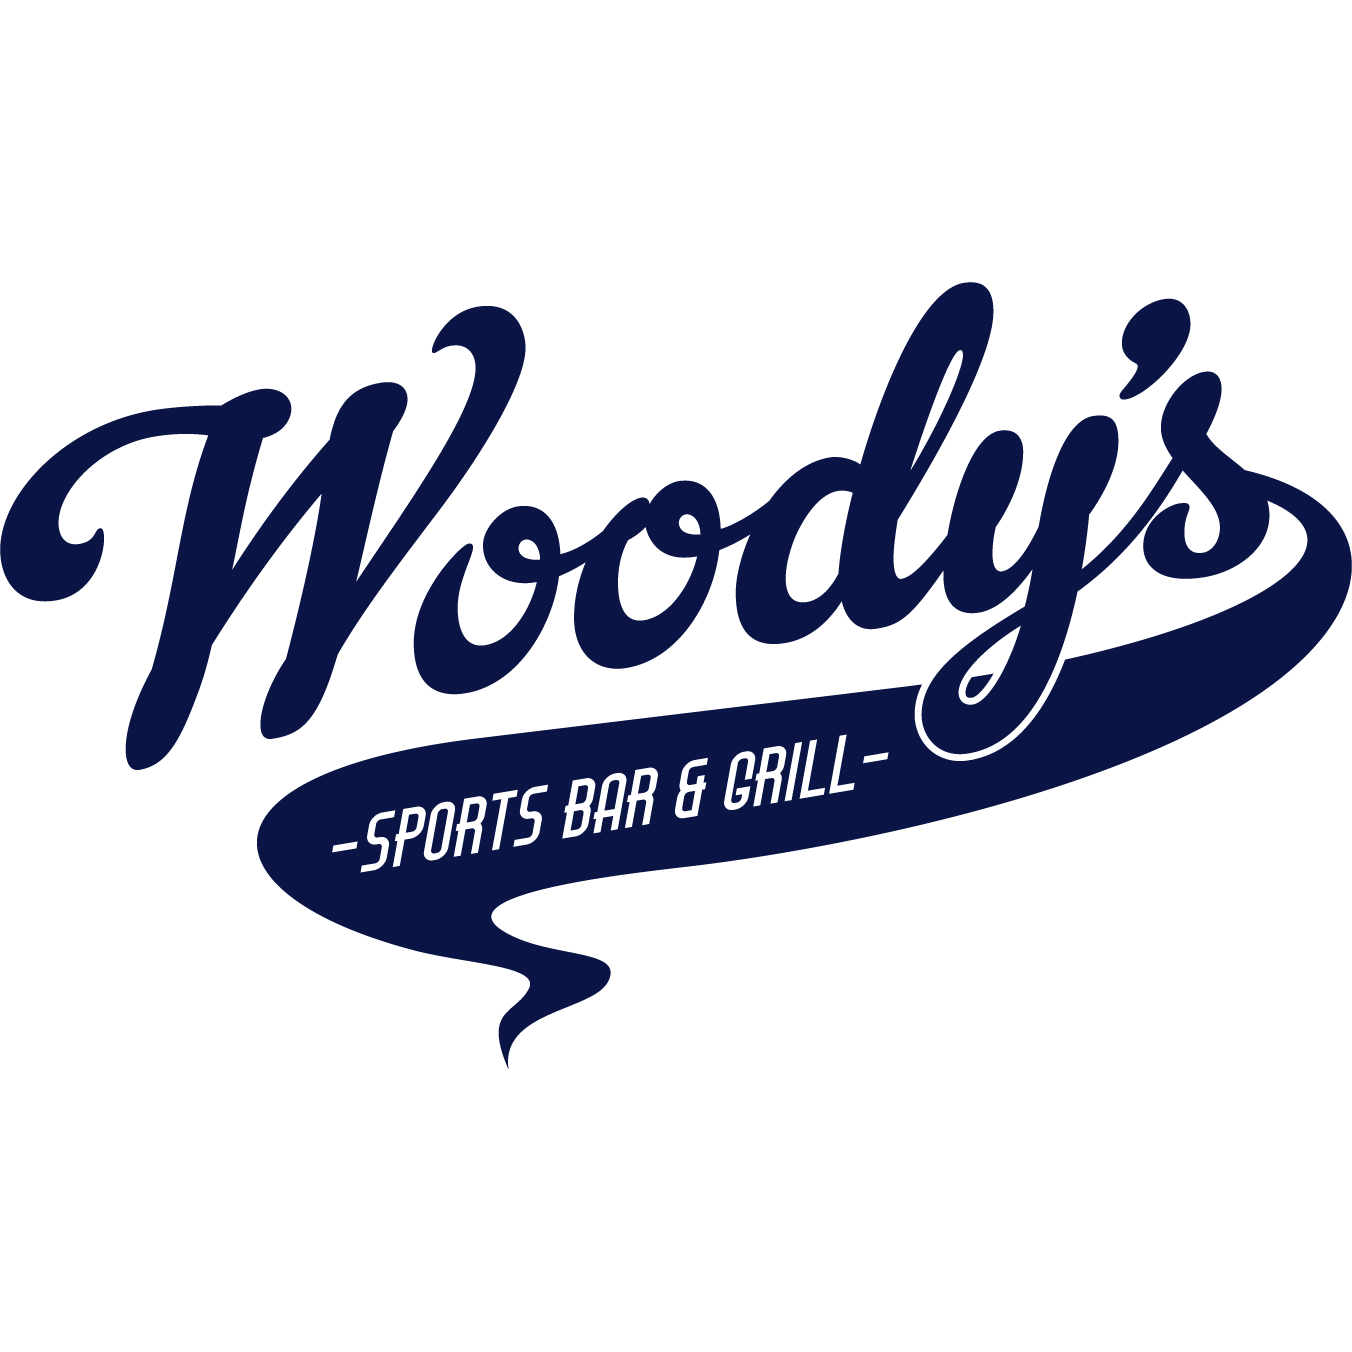 Woody’s Sports Bar & Grill